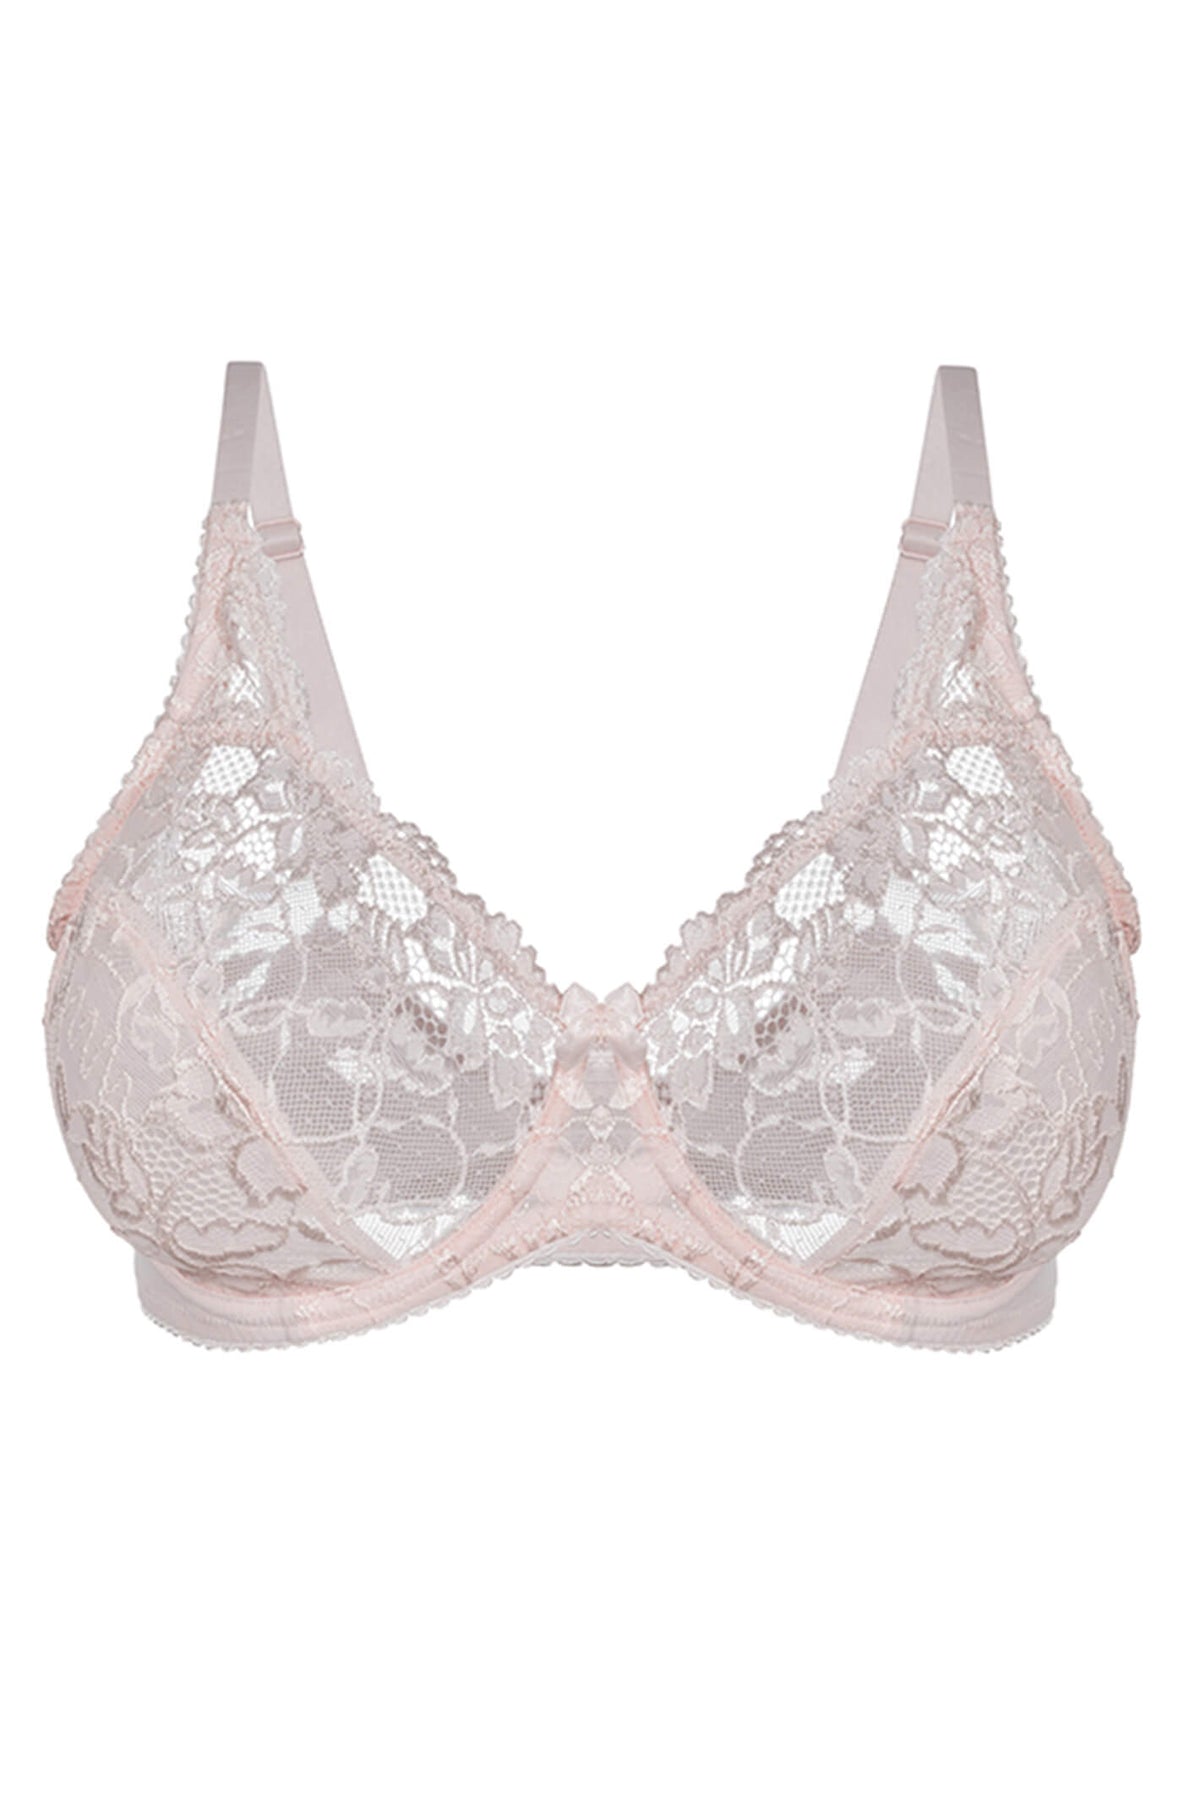 Charnos 116501 Rosalind Soft Pink Full Cup Underwired Bra